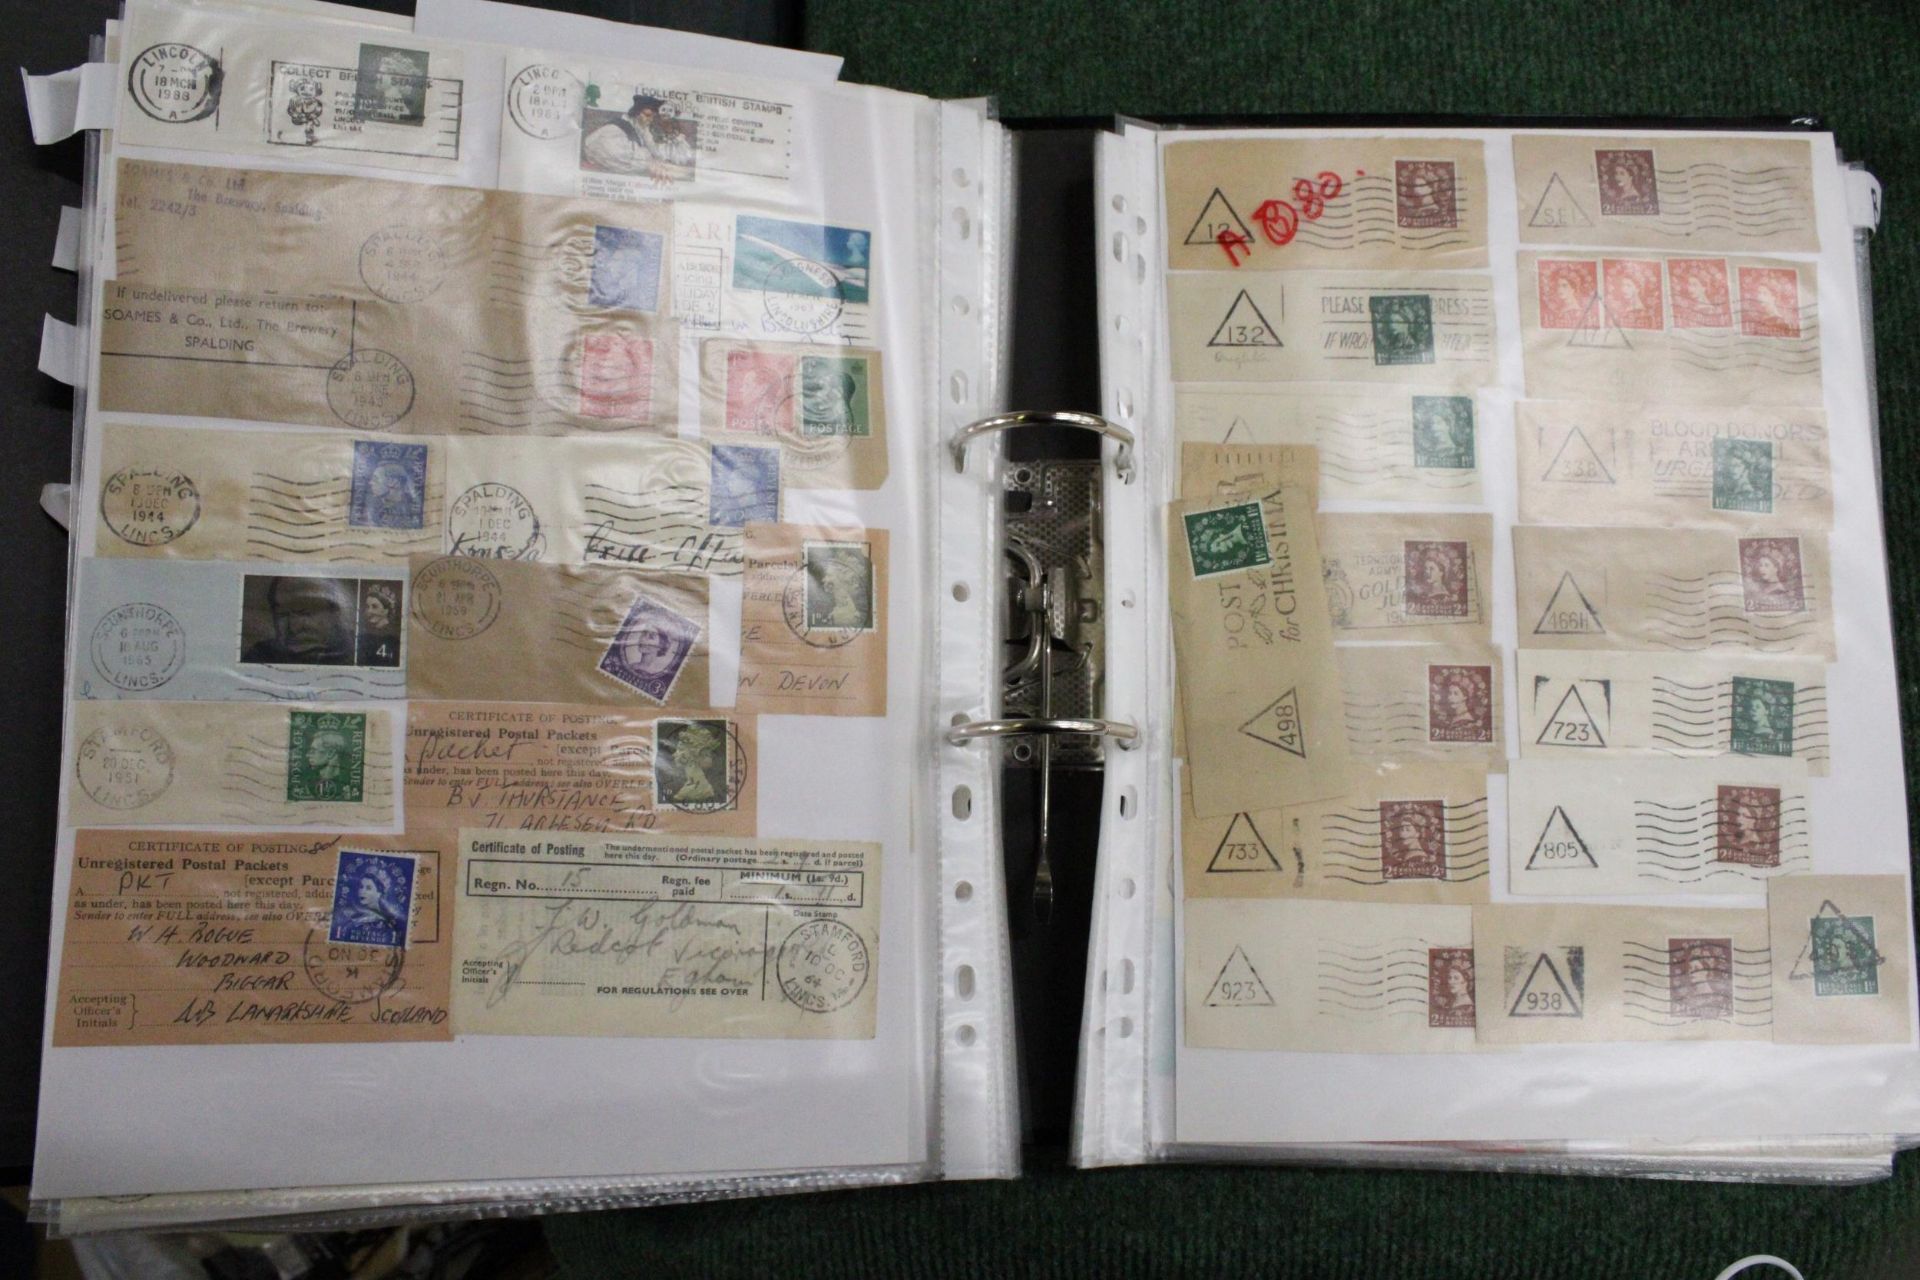 AN ALBUM CONTAINING A COLLECTION OF POSTAL HISTORY STAMPS - Image 5 of 5